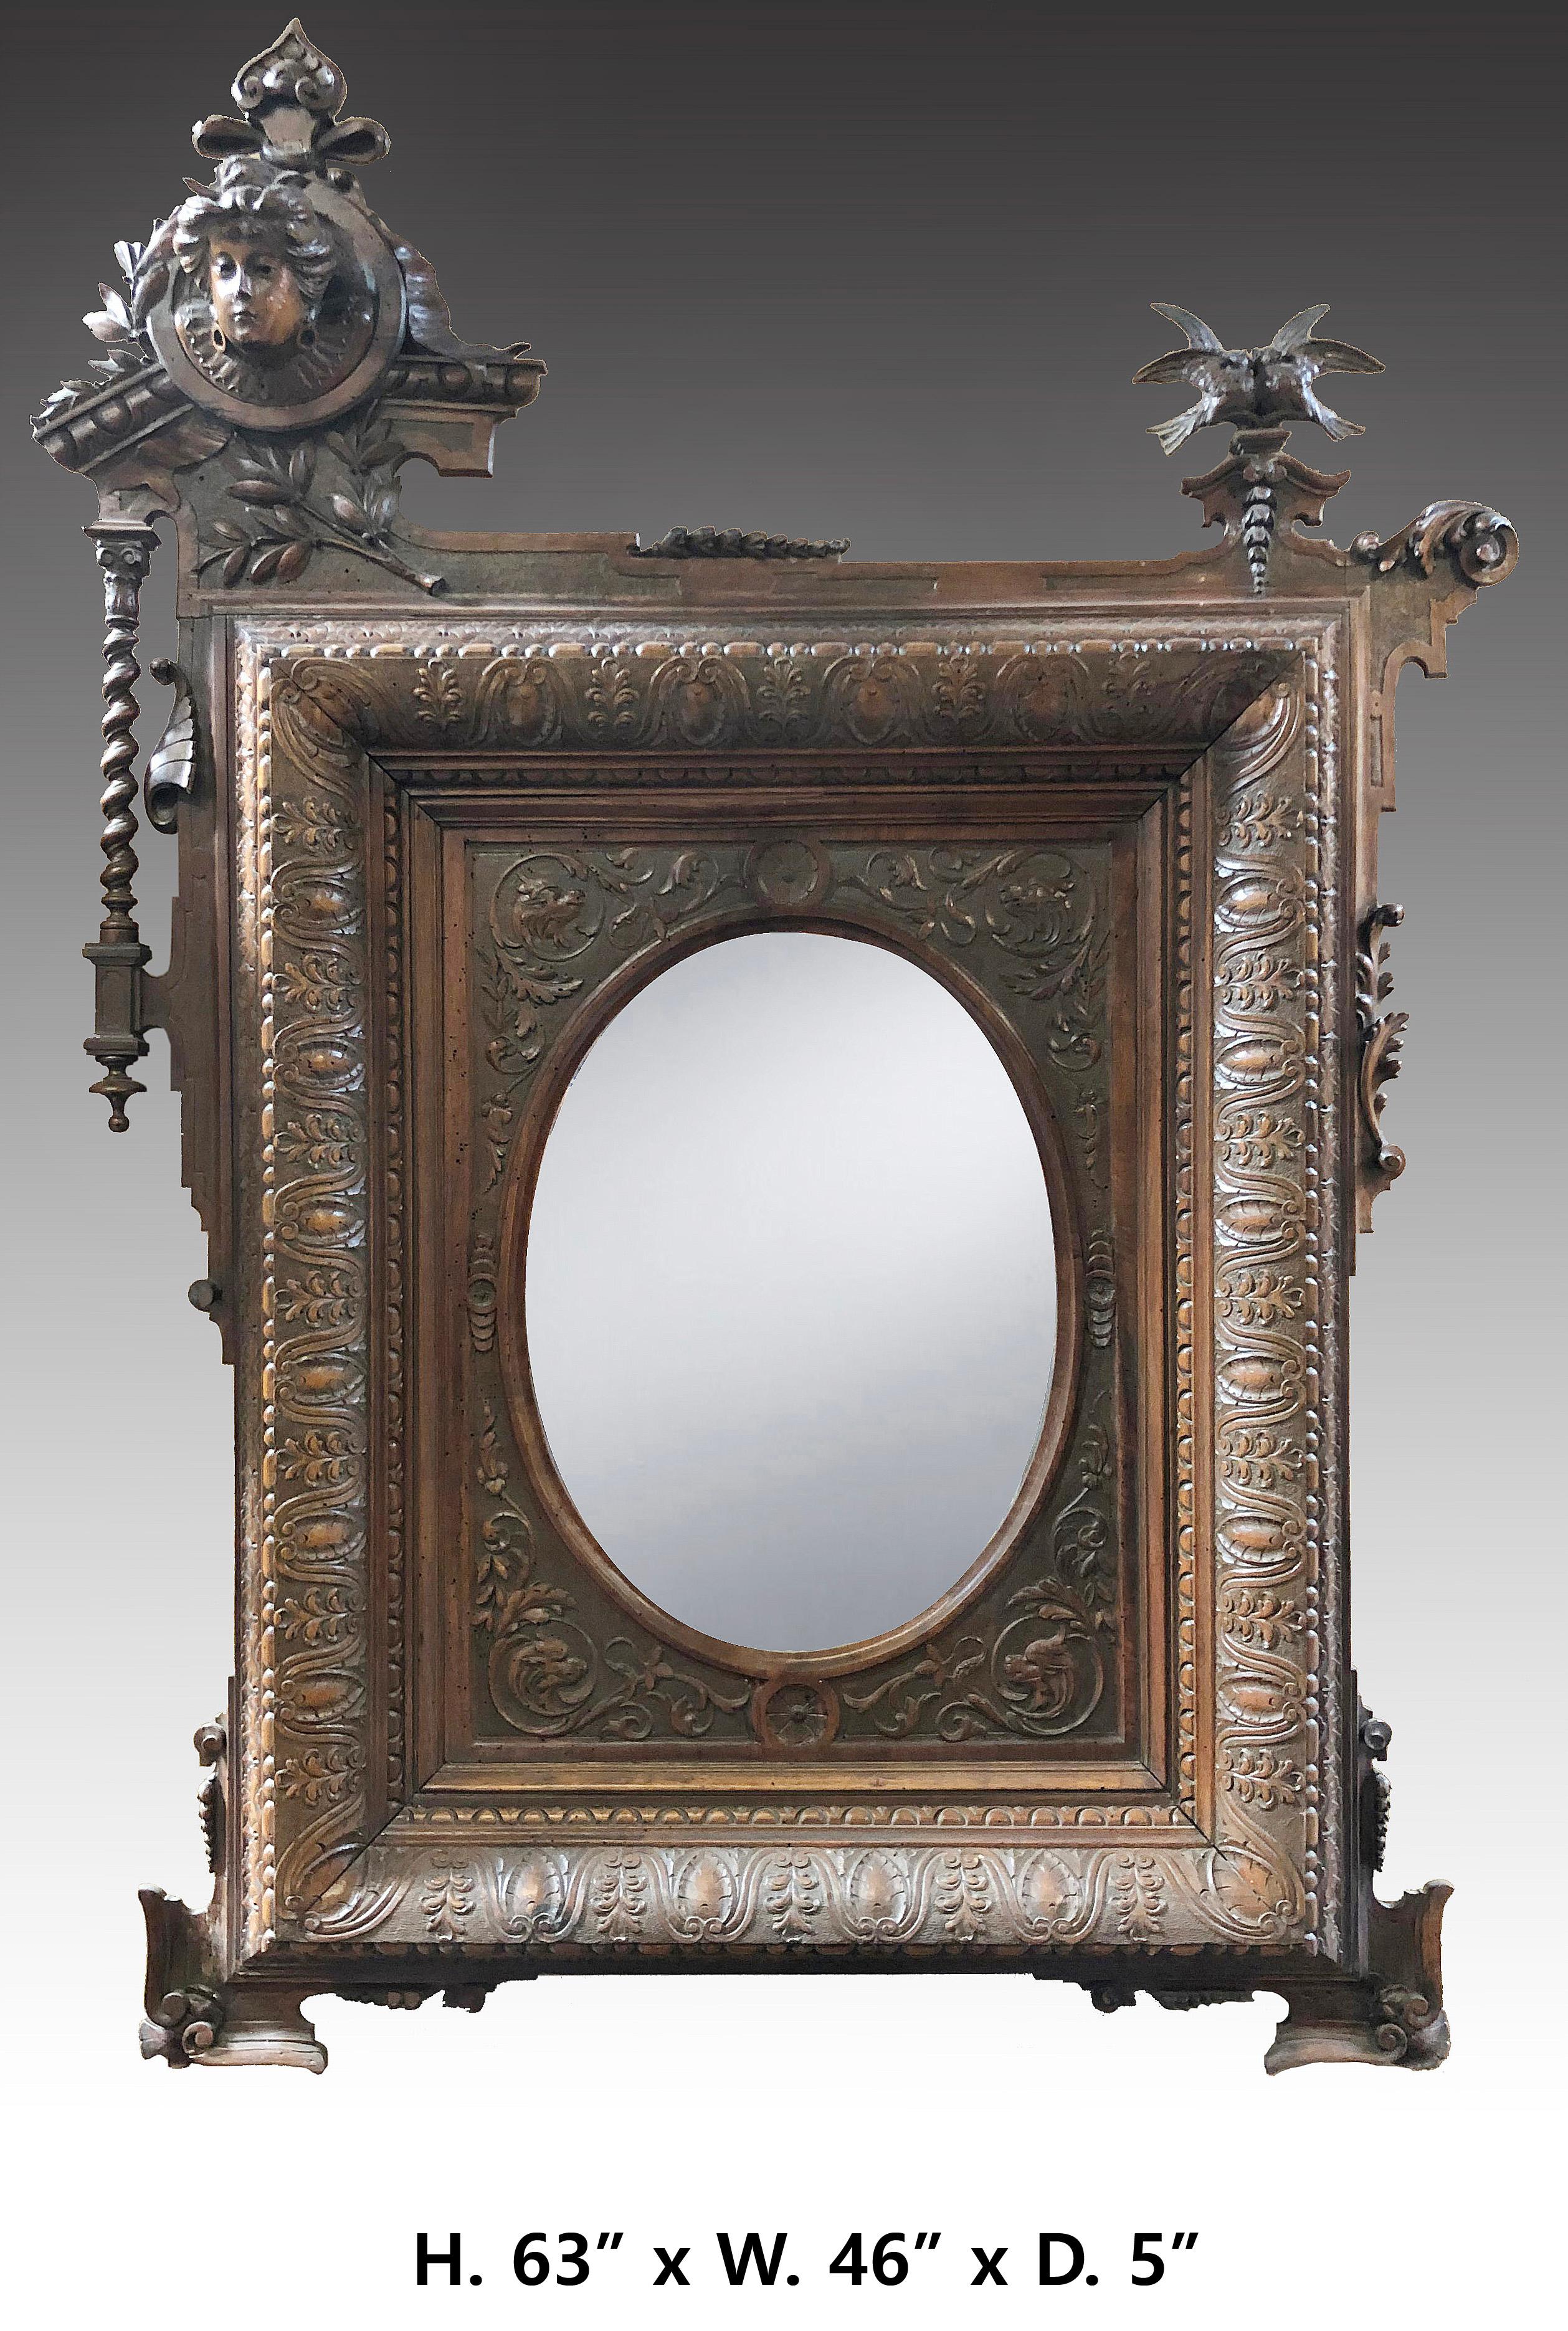 Extremely fine French Art Nouveau carved walnut mirror, unique style..
Meticulous attention has been given to every details.
Circa 1900